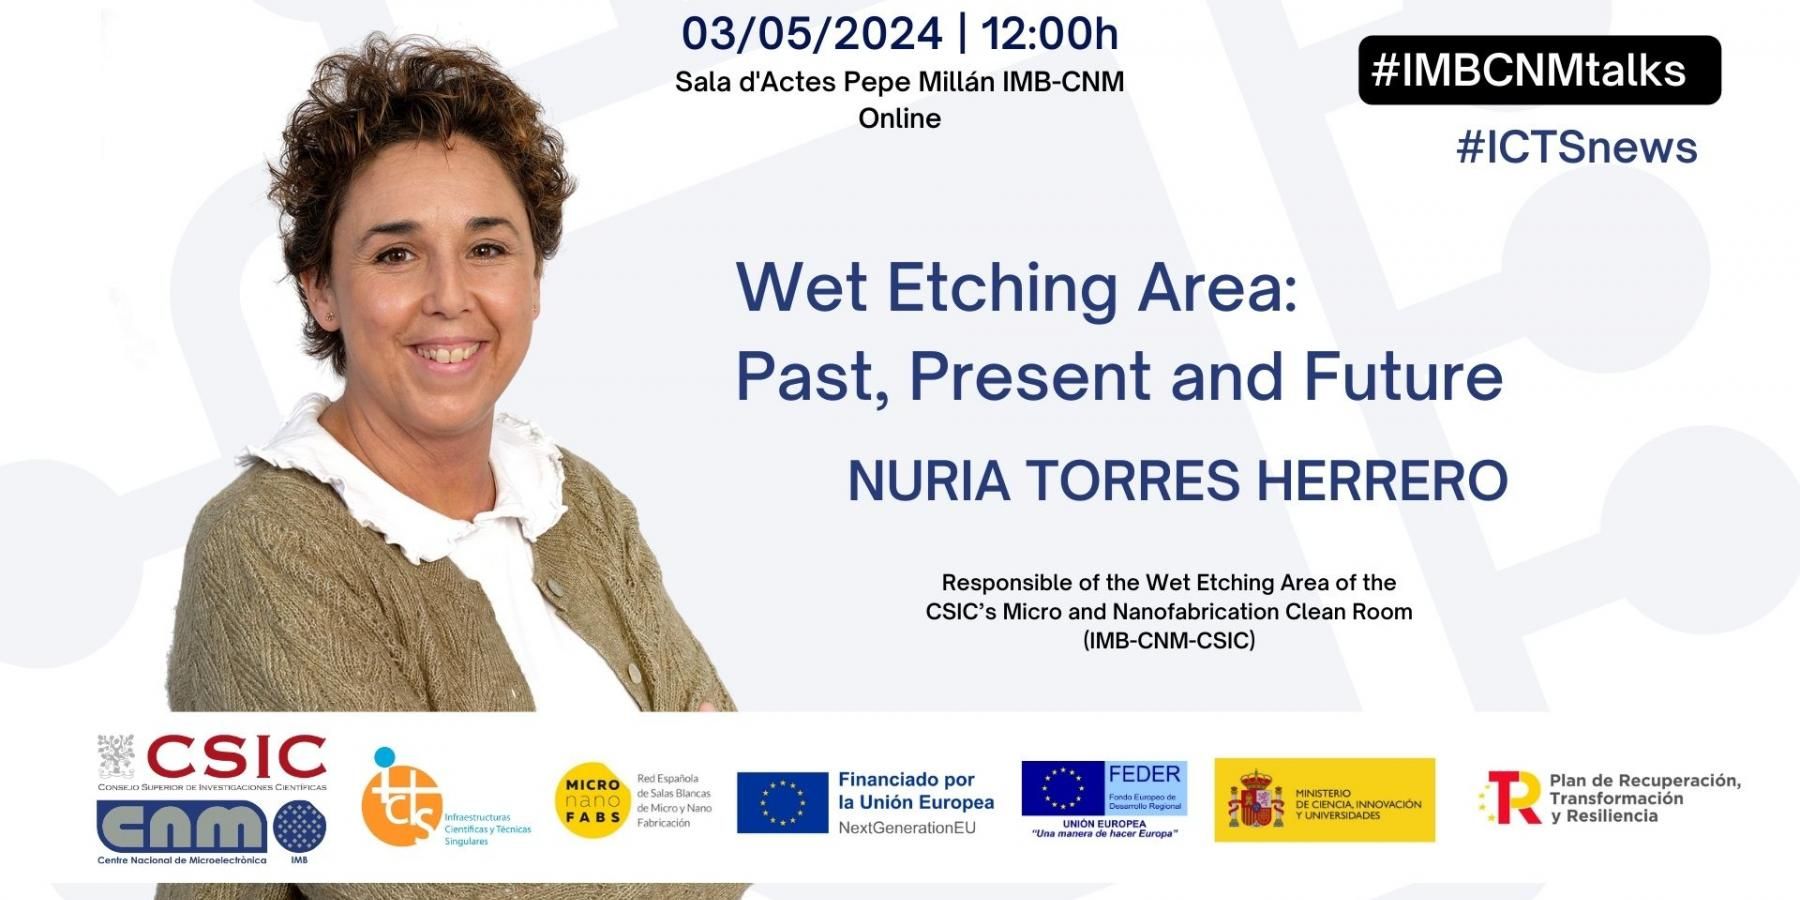 IMB-CNM Talks: Wet Etching Area with Nuria Torres